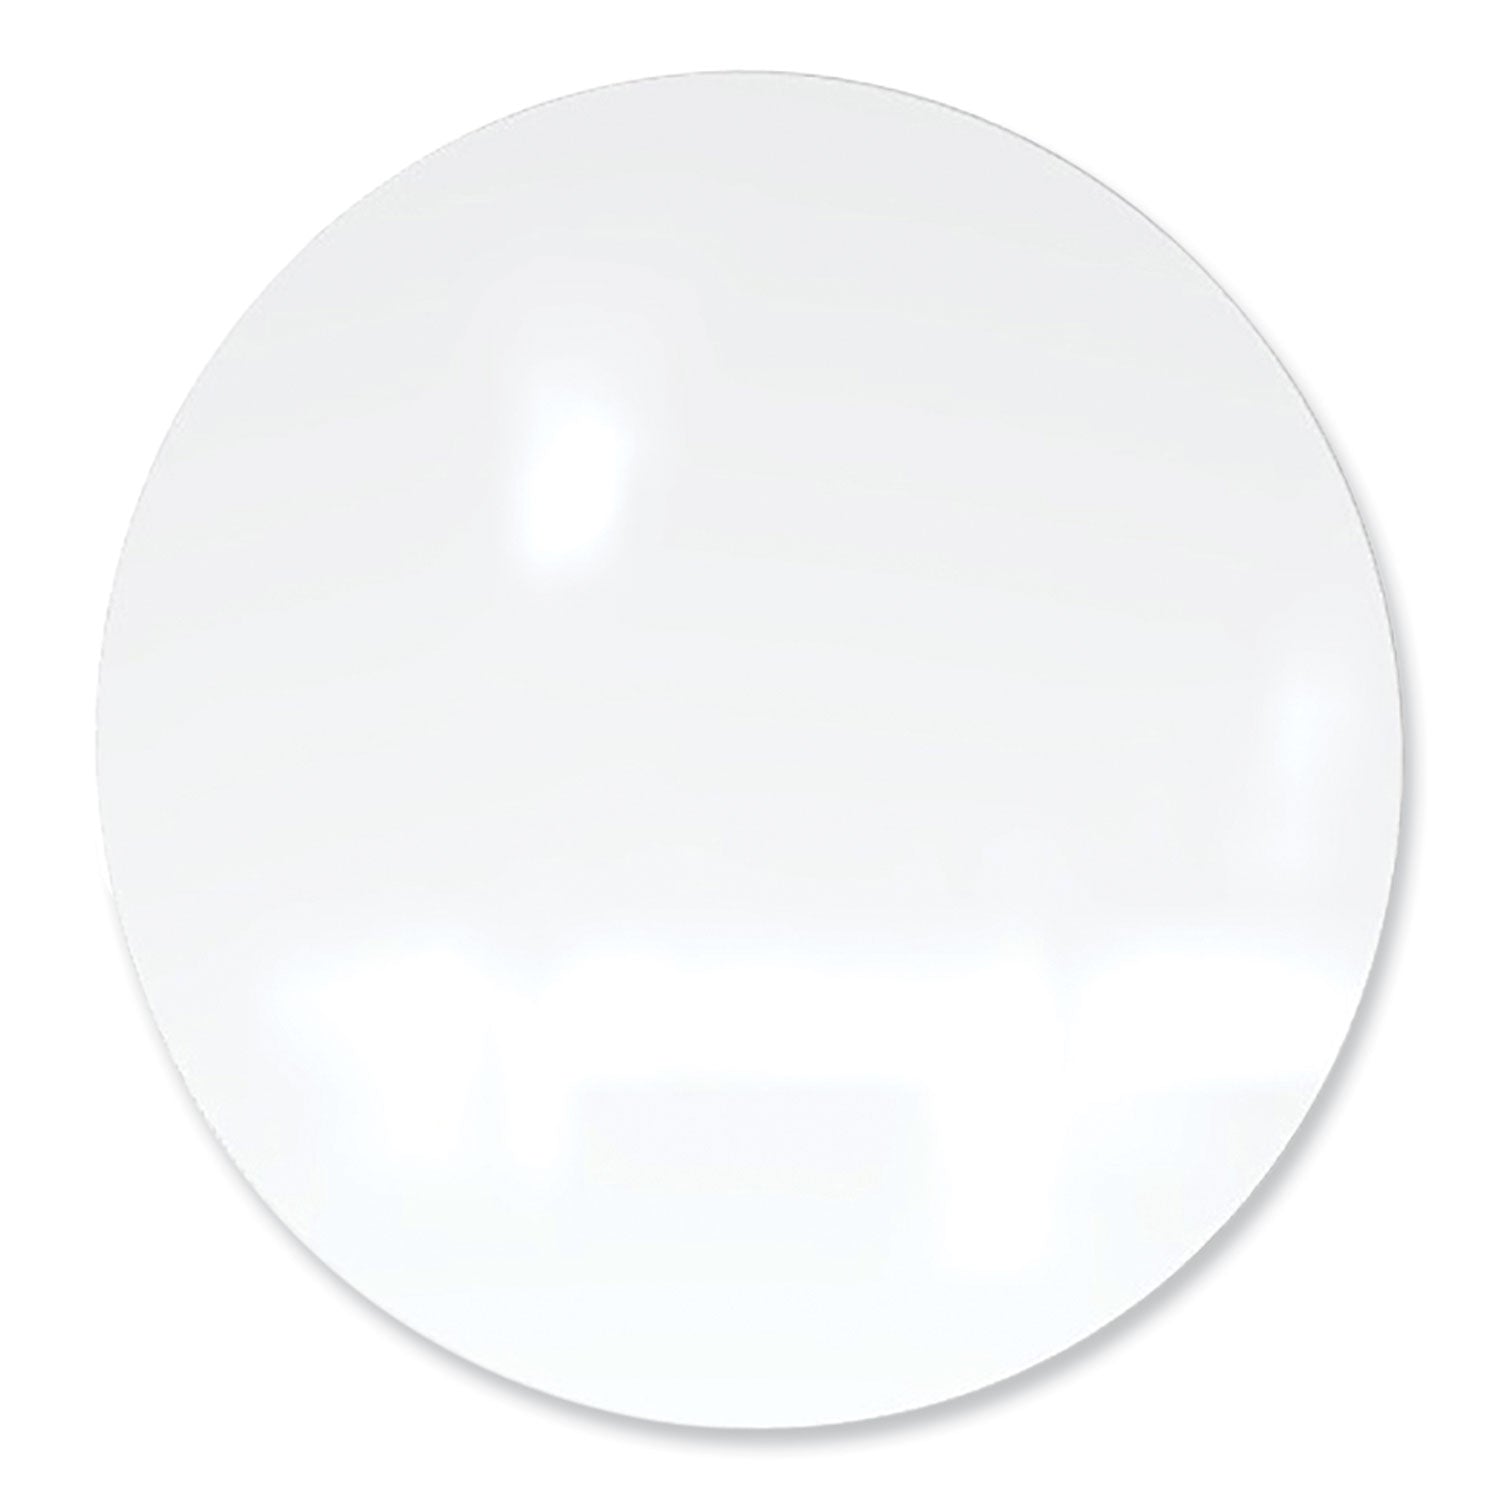 coda-low-profile-circular-non-magnetic-glassboard-48-diameter-white-surface-ships-in-7-10-business-days_ghecdagn48wh - 1